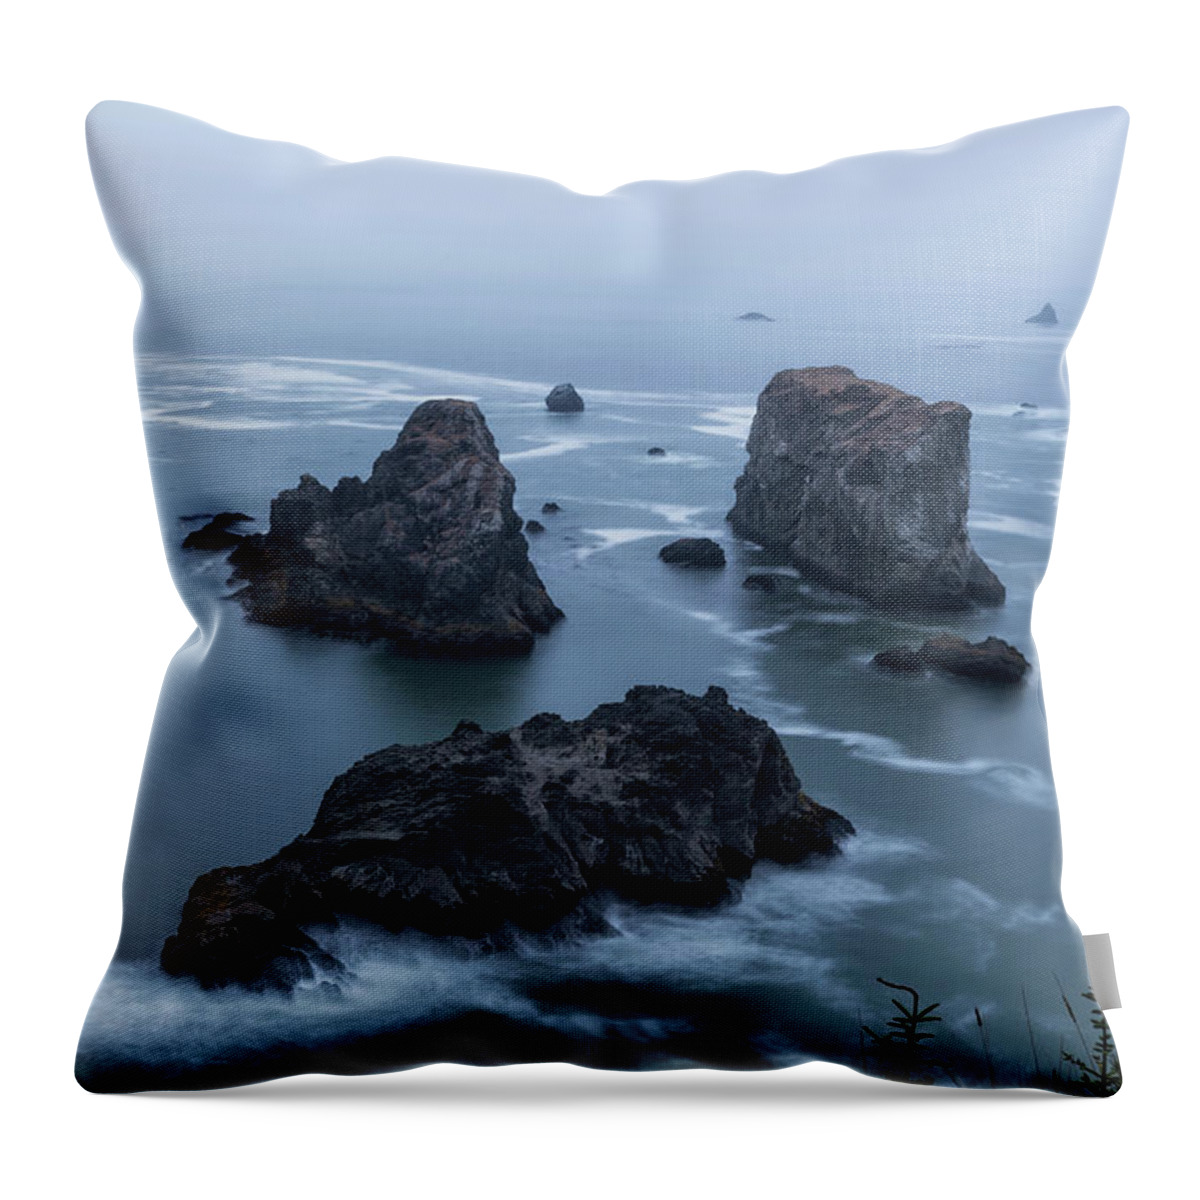 Arch Rock Picnic Area Throw Pillow featuring the photograph Between Dawn and Sunrise at Arch Rock Picnic Area, No. 1 by Belinda Greb